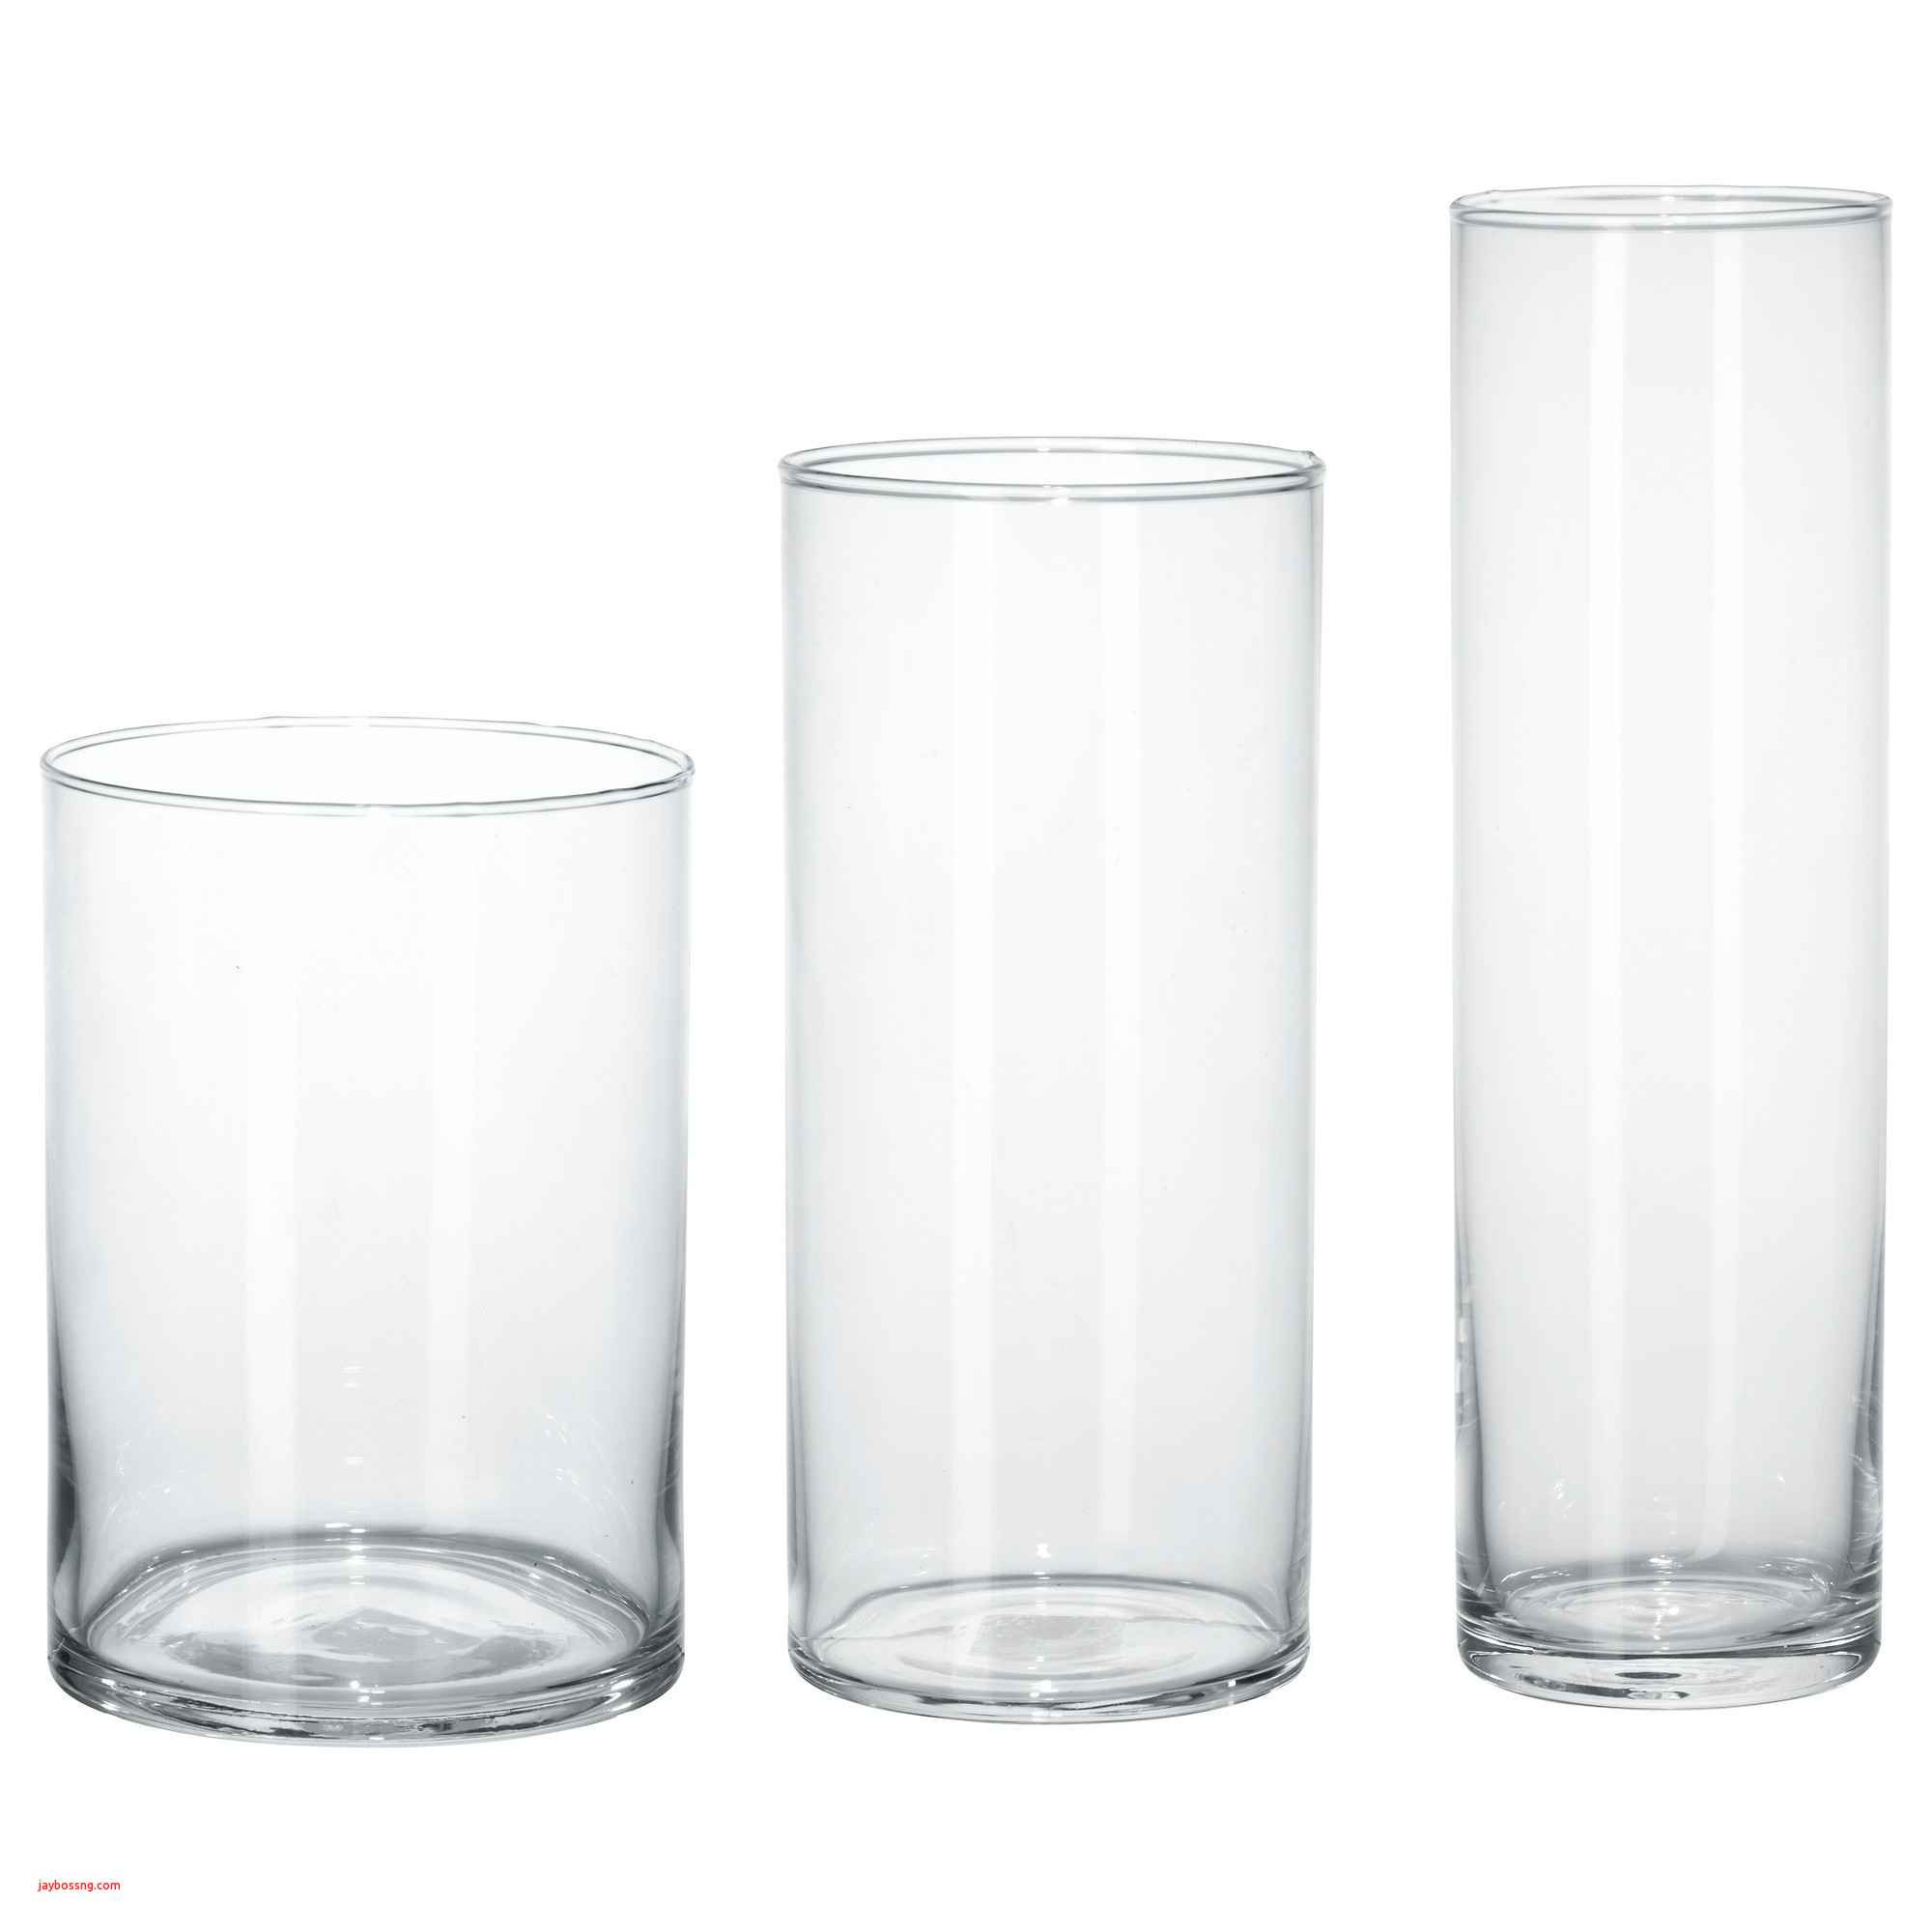 10 attractive Ikea Glass Floor Vase 2024 free download ikea glass floor vase of white vase filler photos ikea white table created pe s5h vases ikea in ikea white table created pe s5h vases ikea vase i 0d bladet